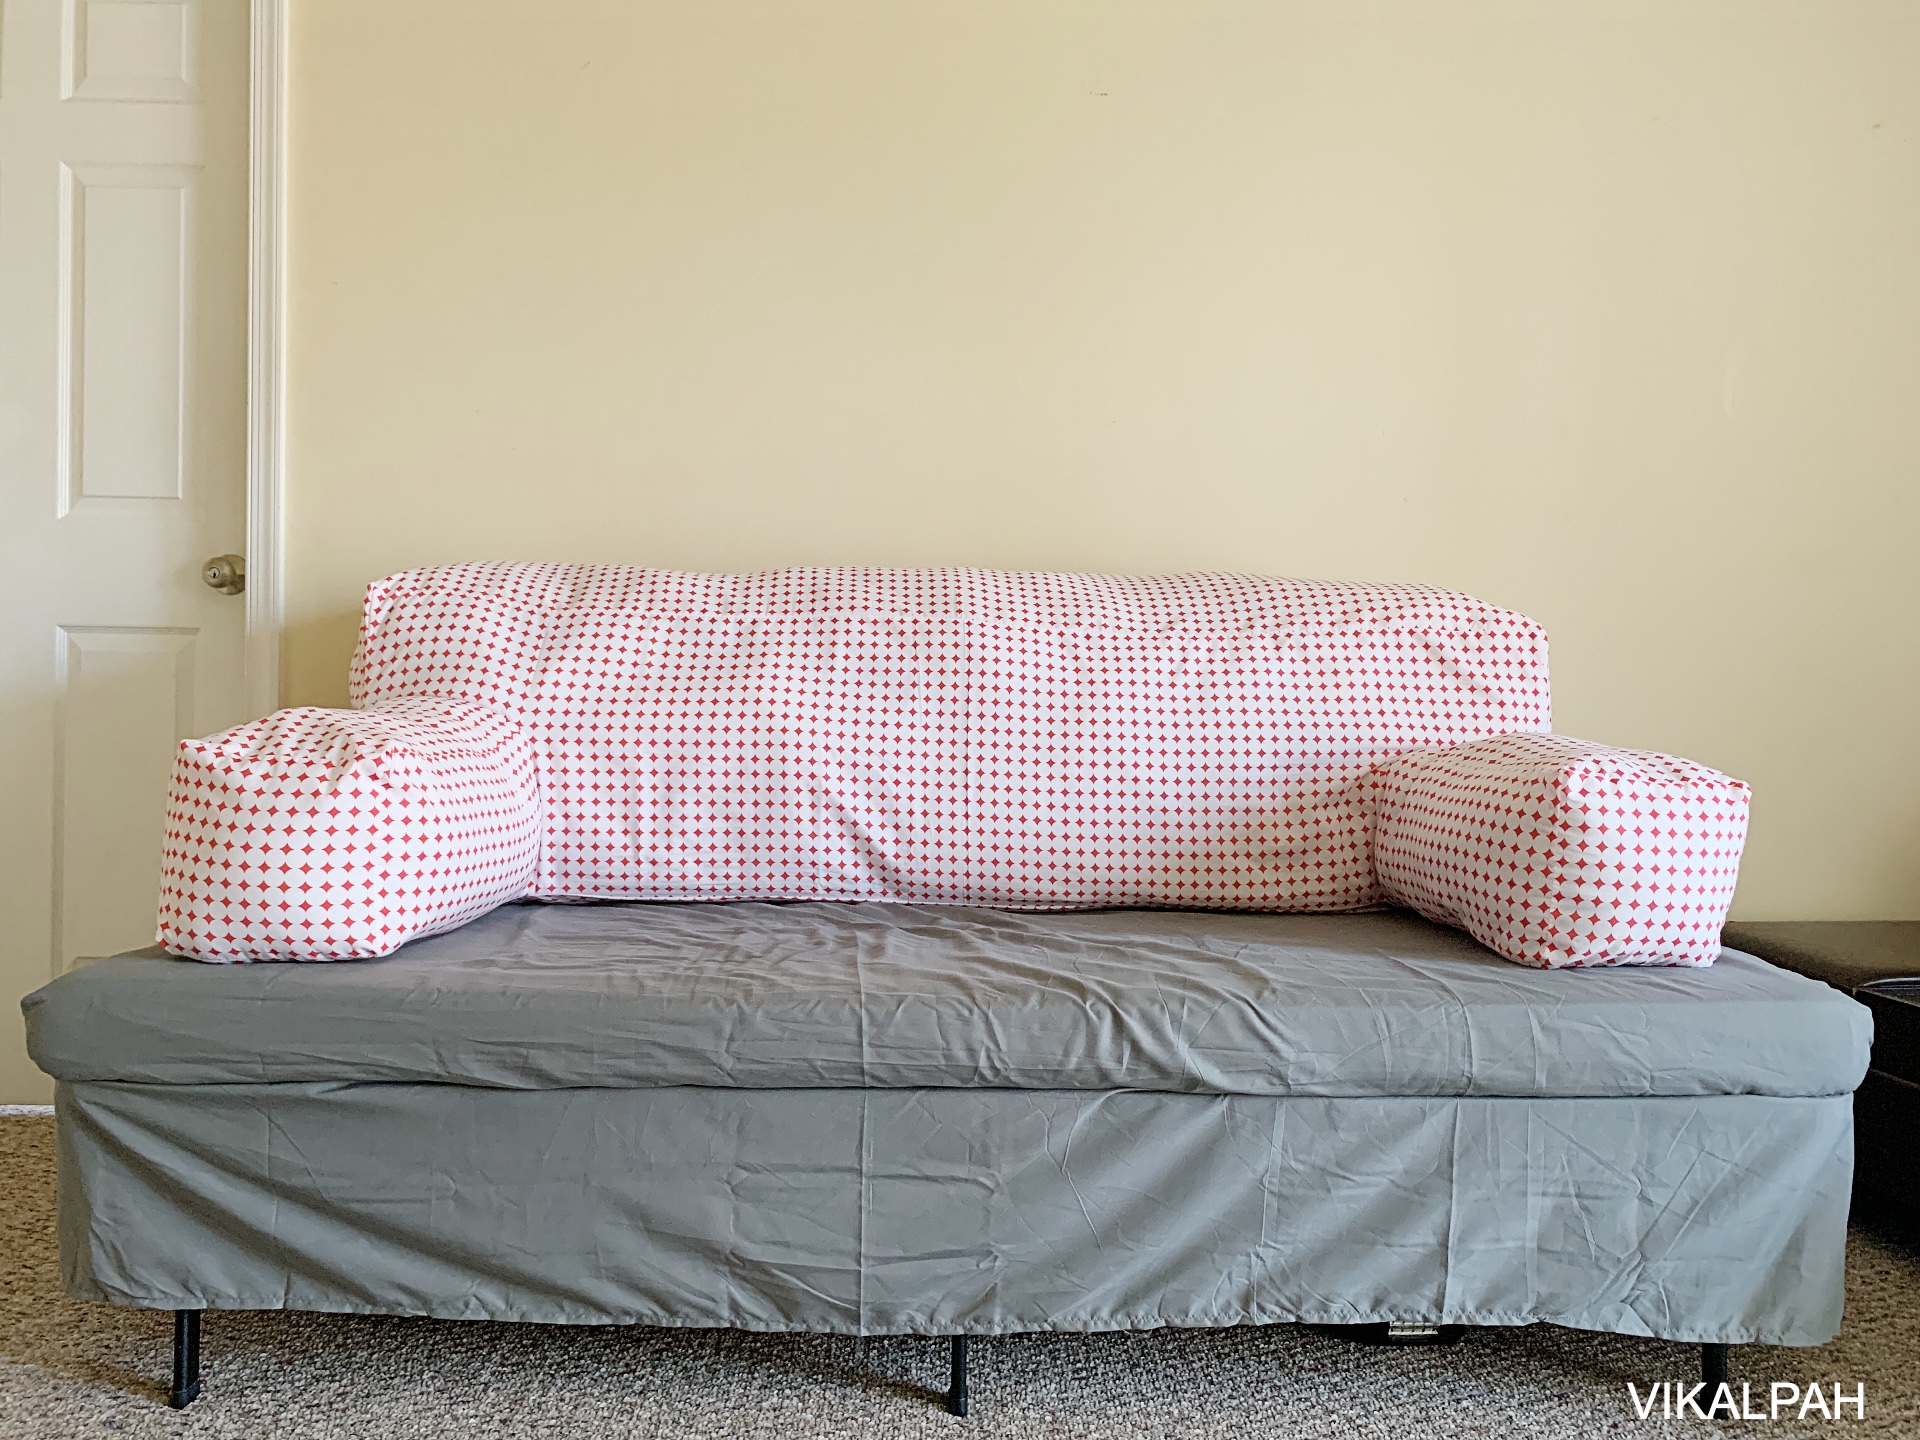 Twin Bed Into A Couch Diy Cover, How To Make A Twin Size Bed Into Couch